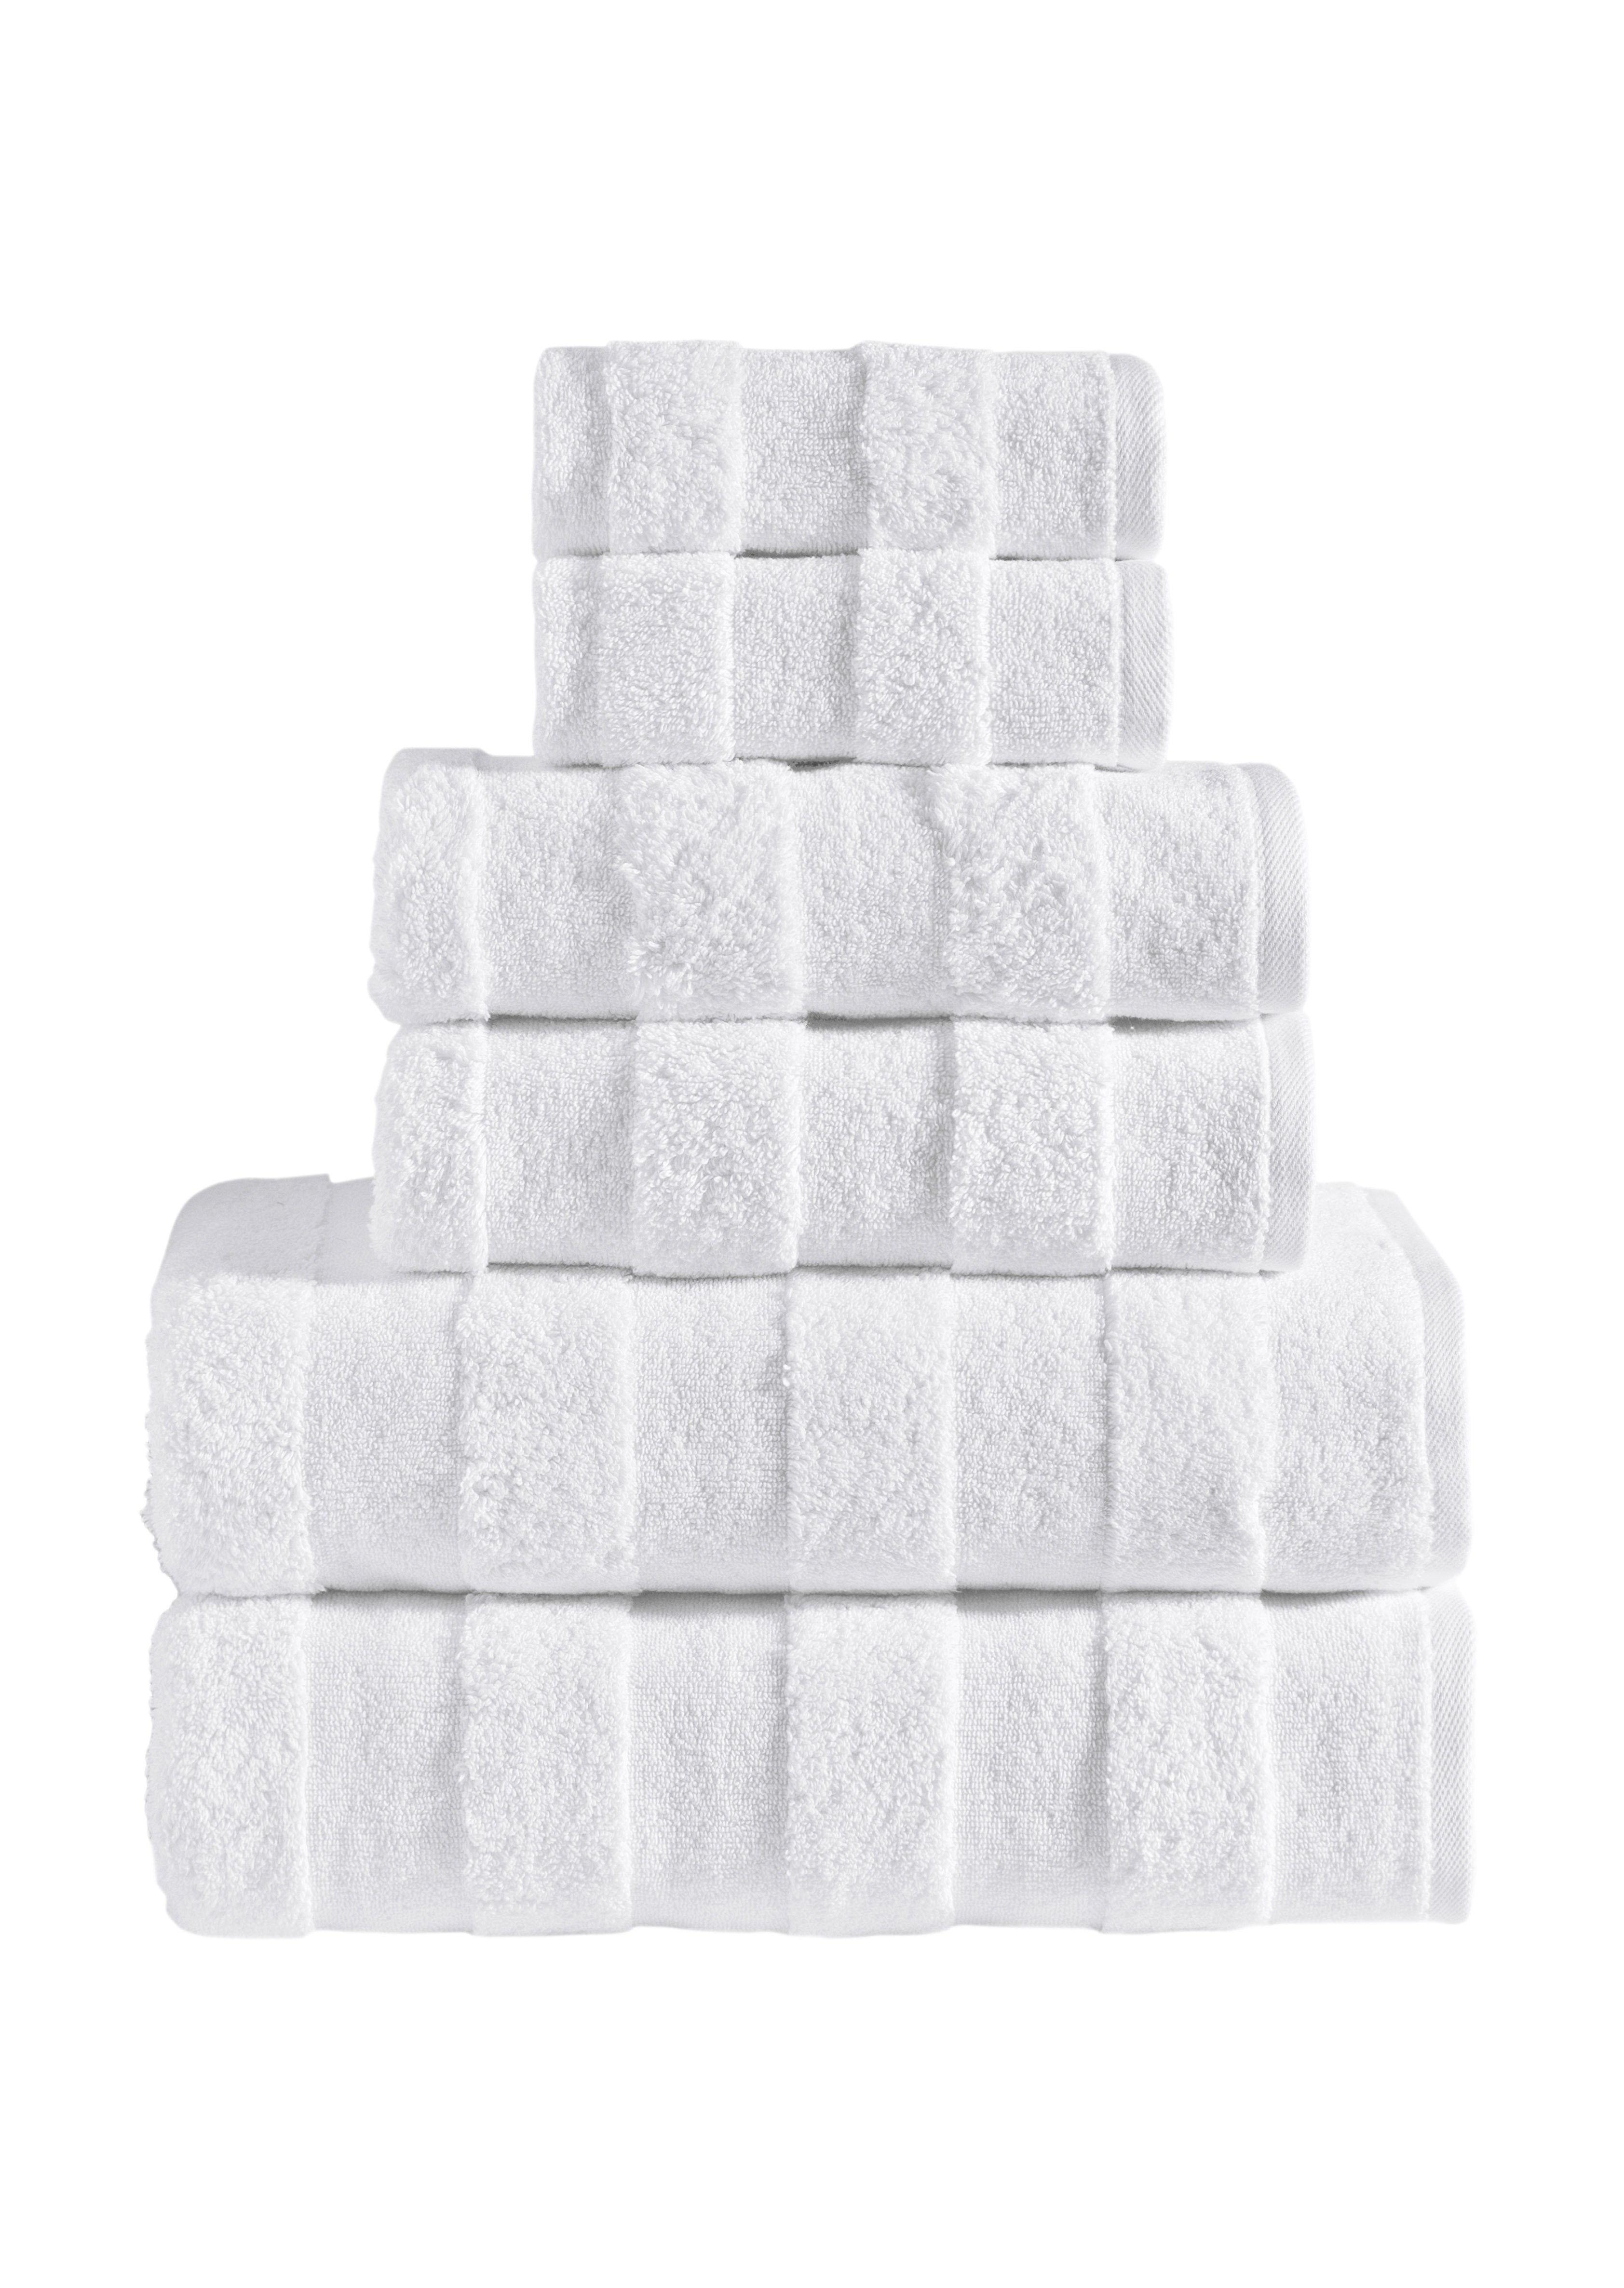 Apogee Collection Luxury 6 PK Towels Set - White By SaaSoh